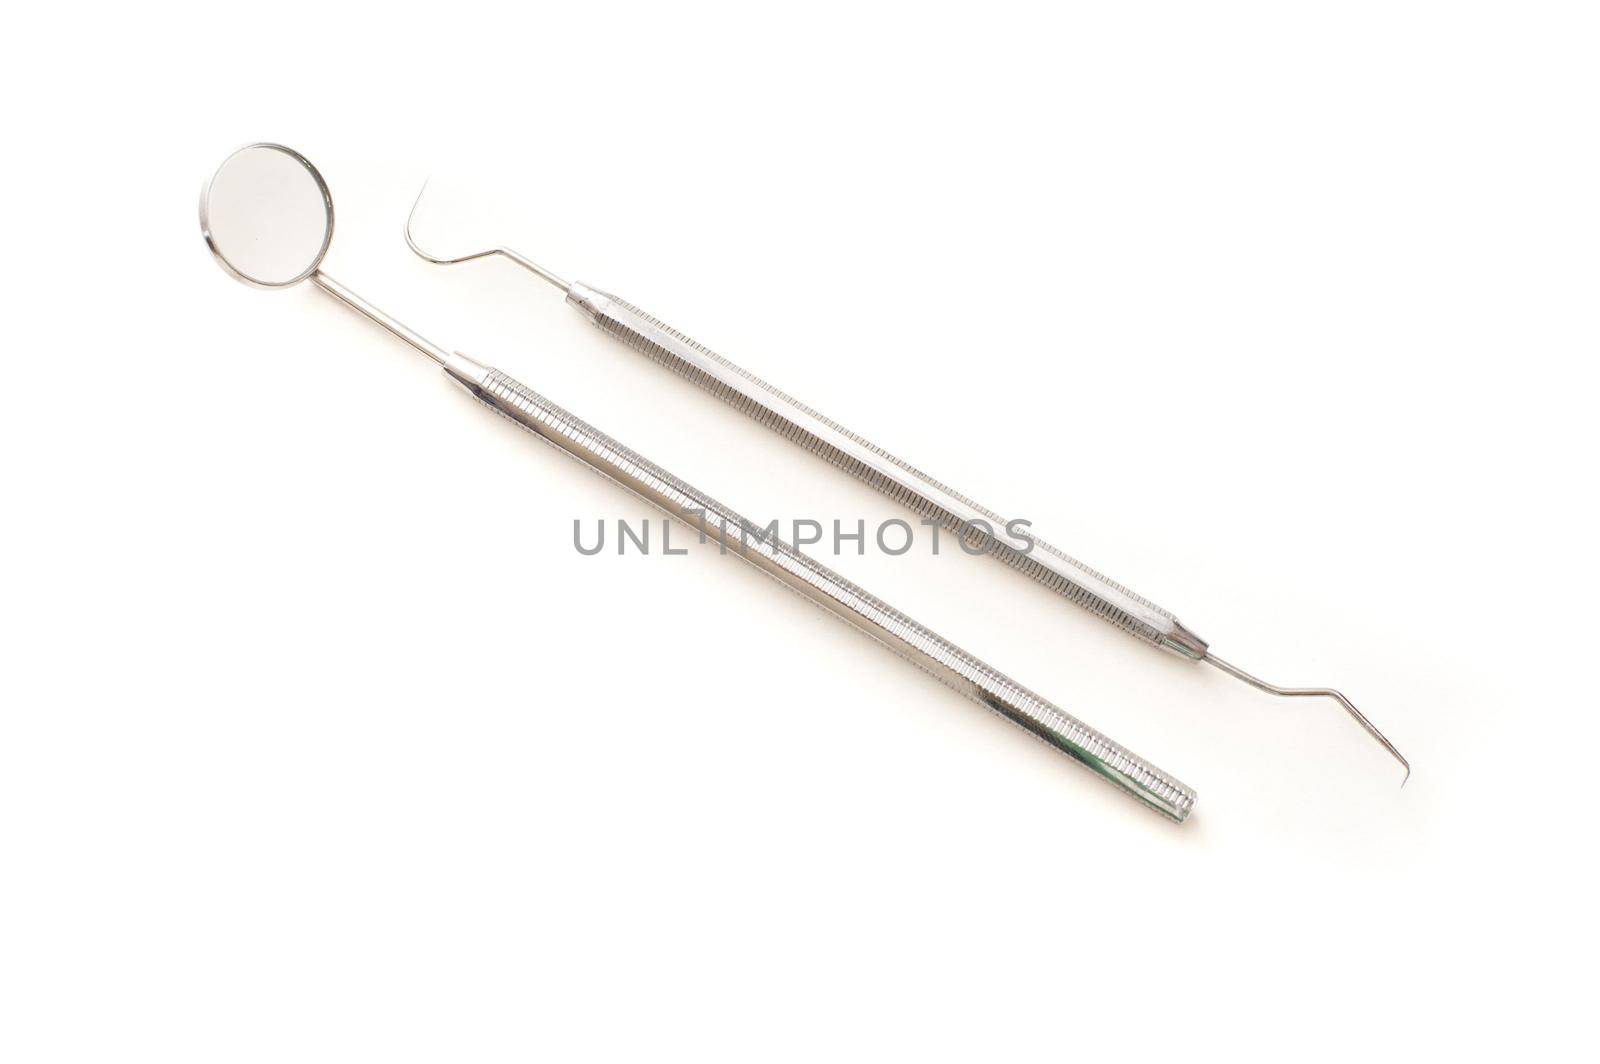 Dentists tools displayed on white with a stainless steel mirror and pick for examining teeth for caries and decay in his surgery, medical and healthcare concept